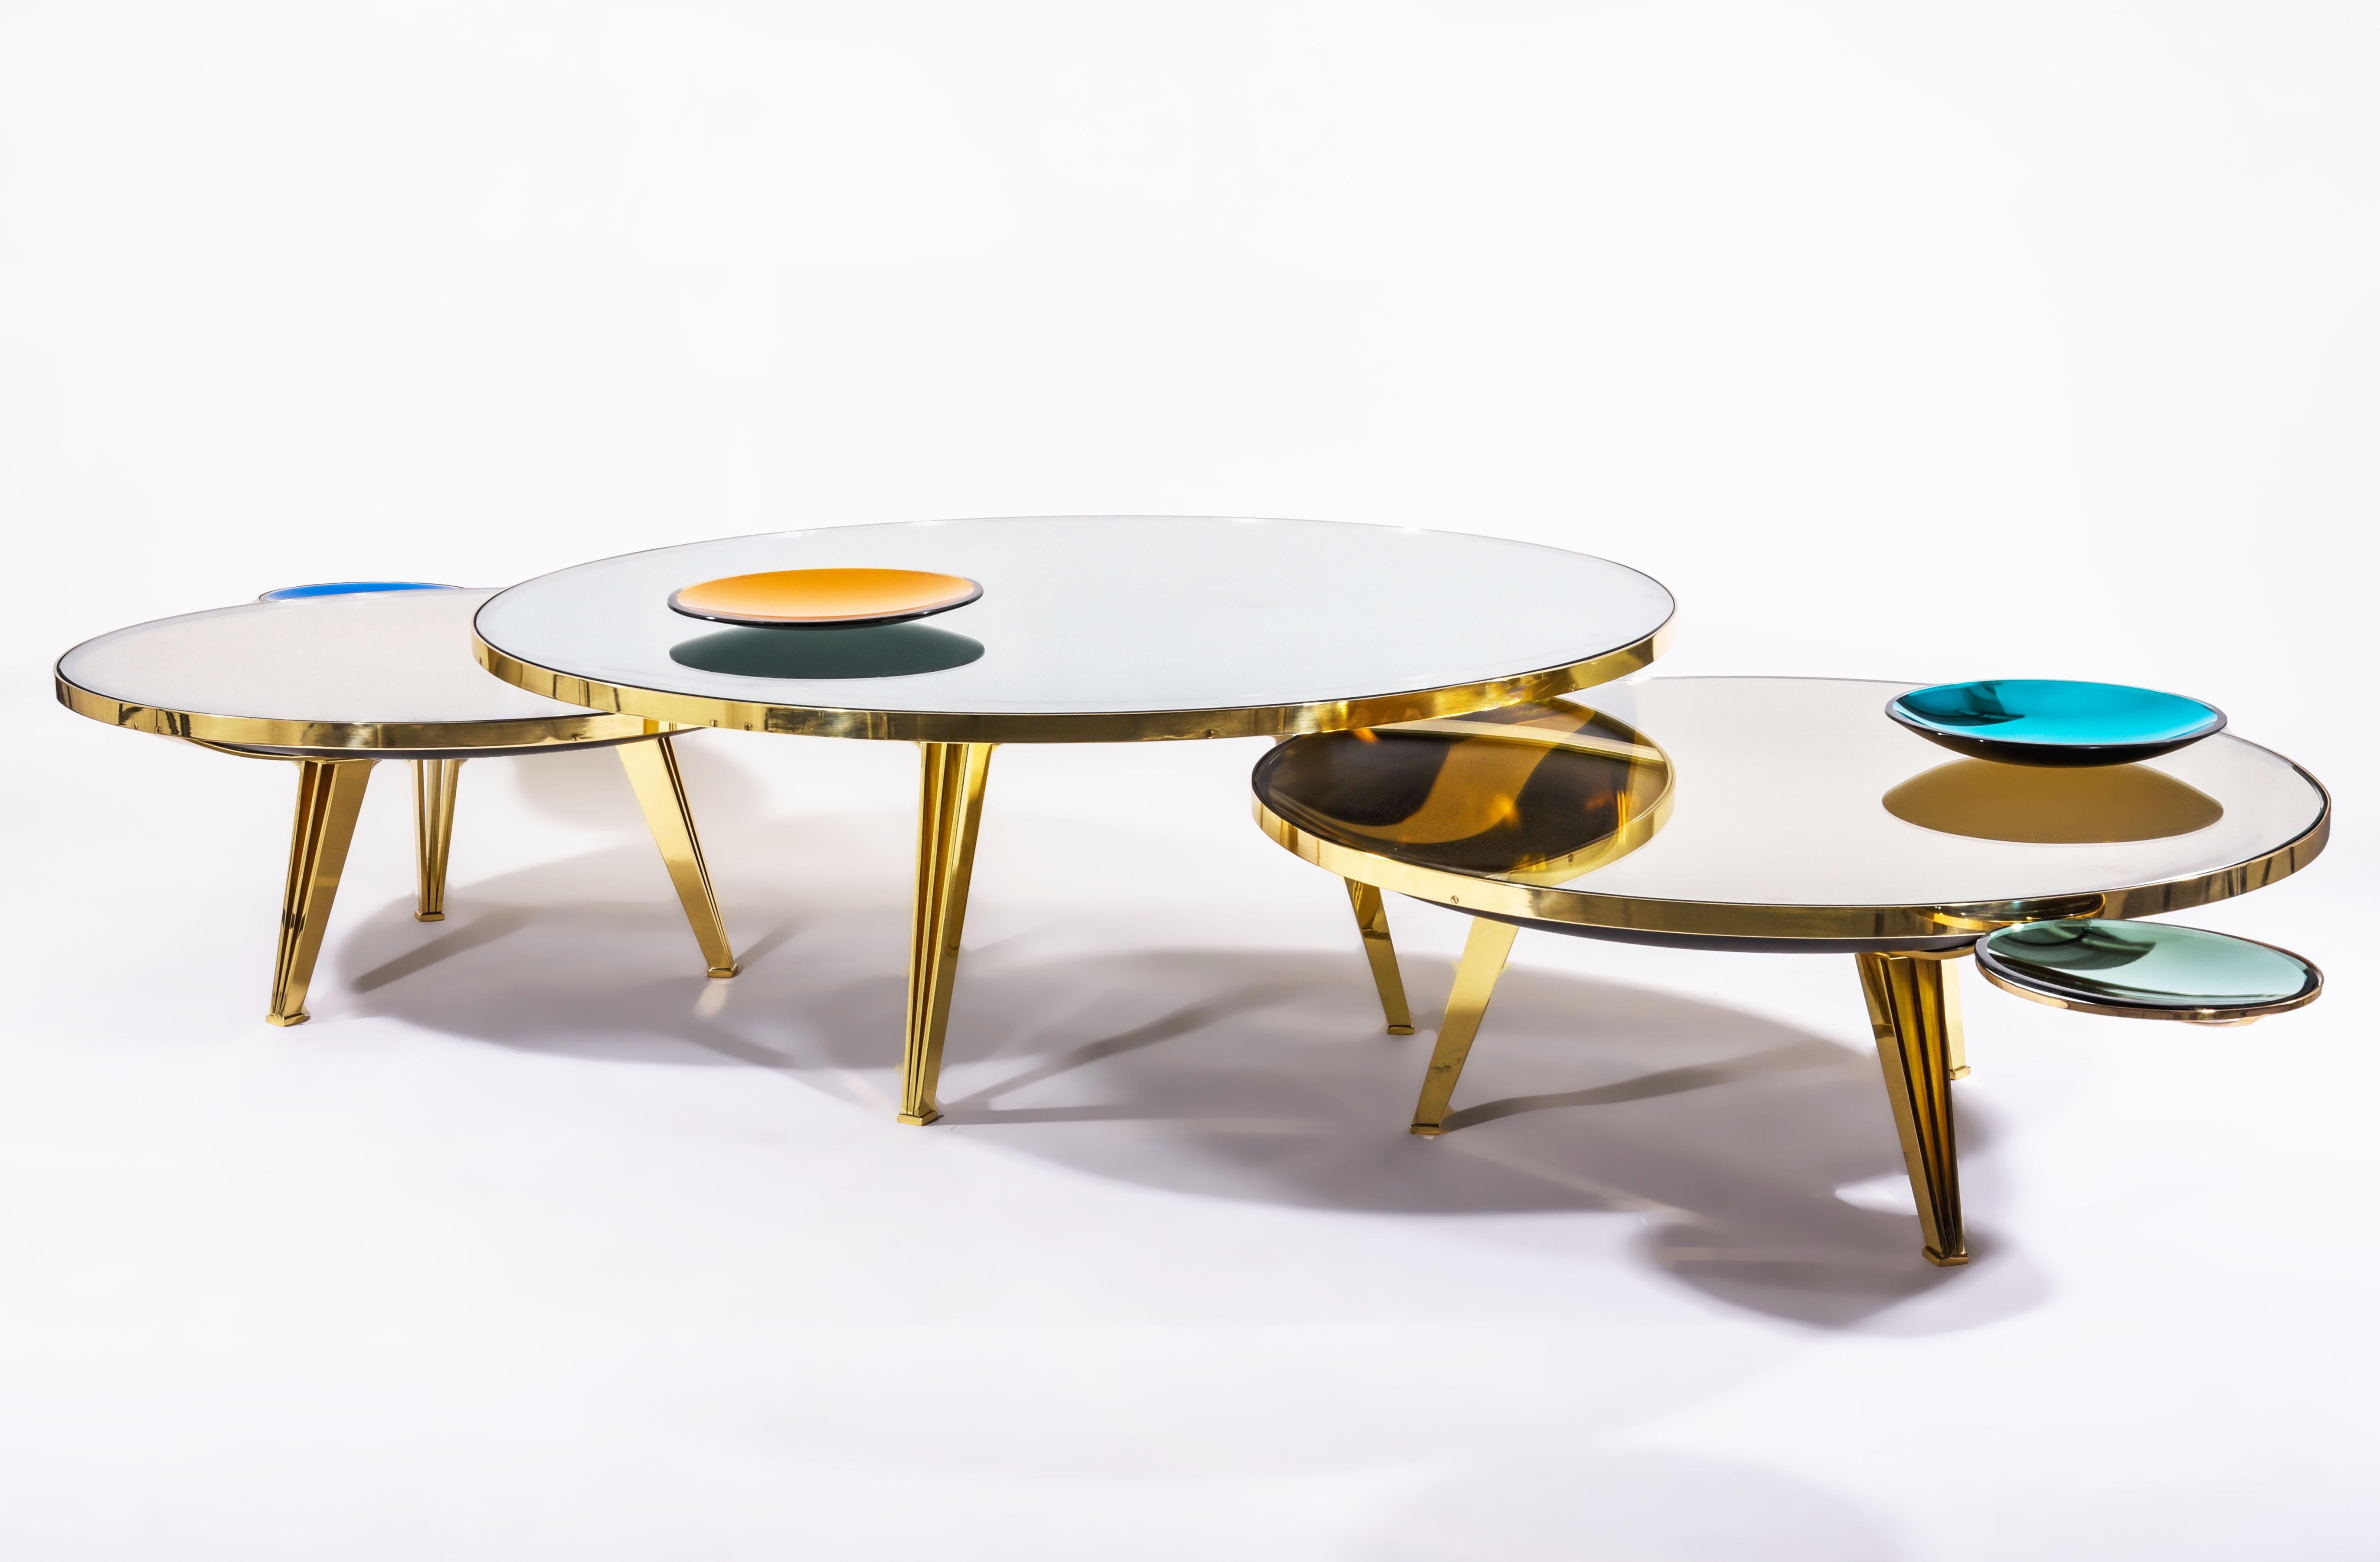 The Riflesso table is designed around a tinted and mirrored double lens glass top which gives the piece a unique sense of depth. Can be upgraded with decorative mirrored glass dishes; One that can be mounted on a removable lateral bracket and the